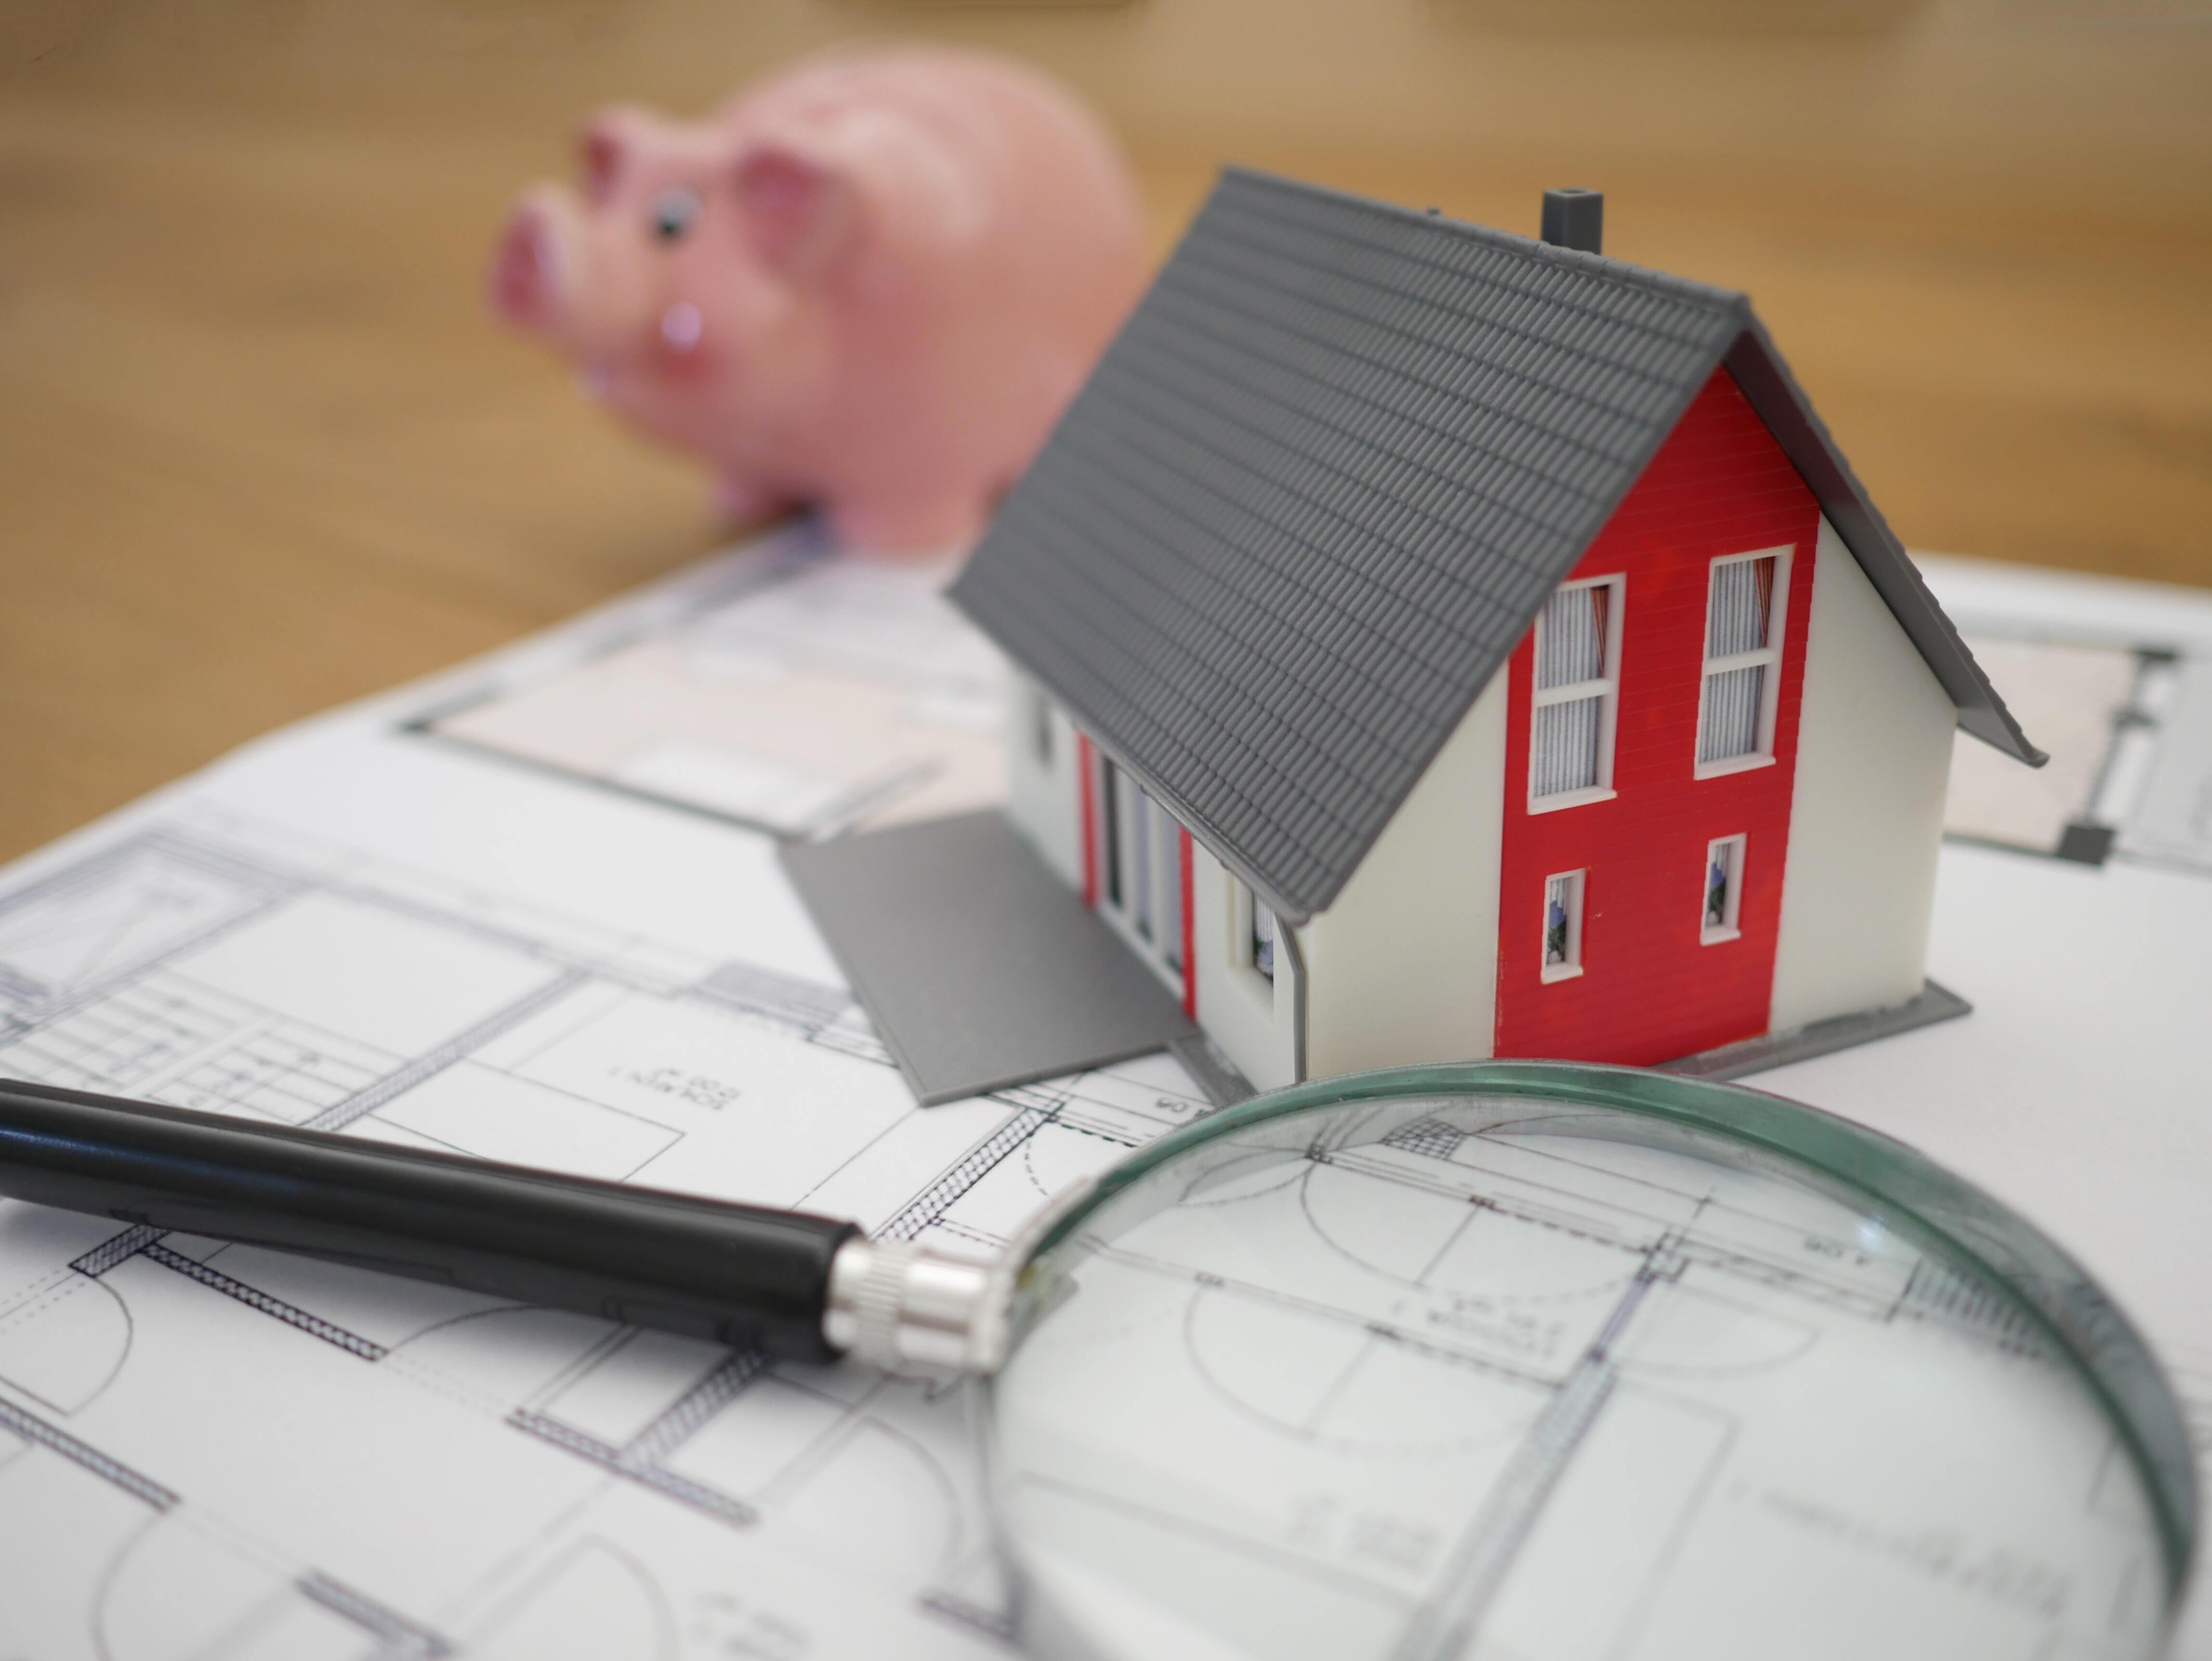 a toy house, magnifying glass and a piggy bank sit on a desk